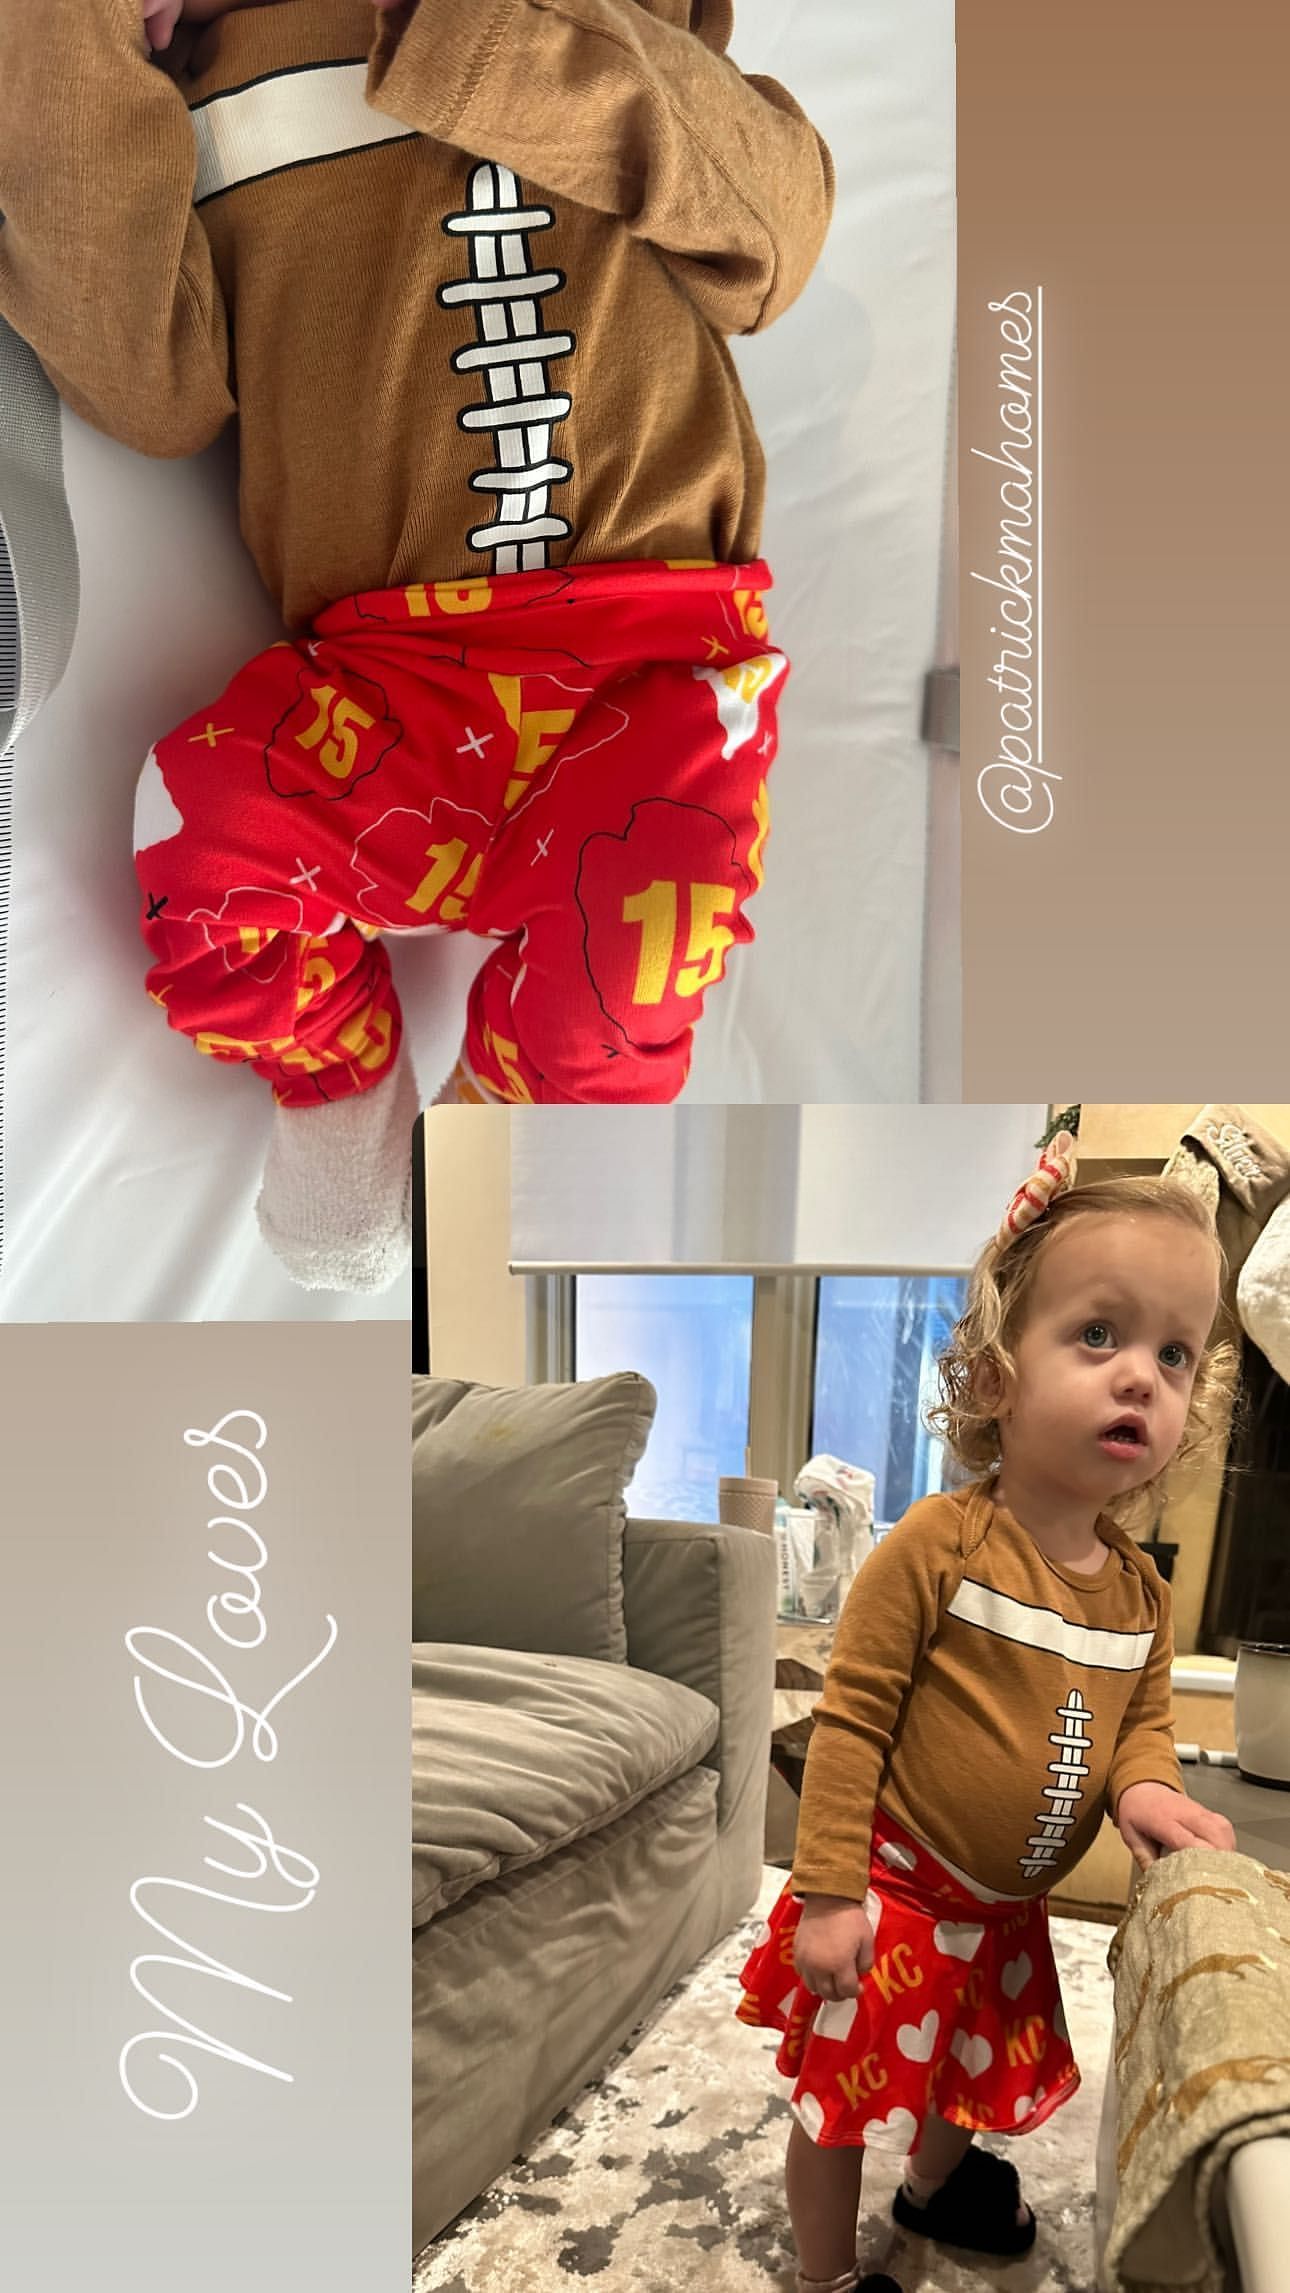 Patrick Mahomes' Son Bronze and Daughter Sterling Cheer Him on at Home